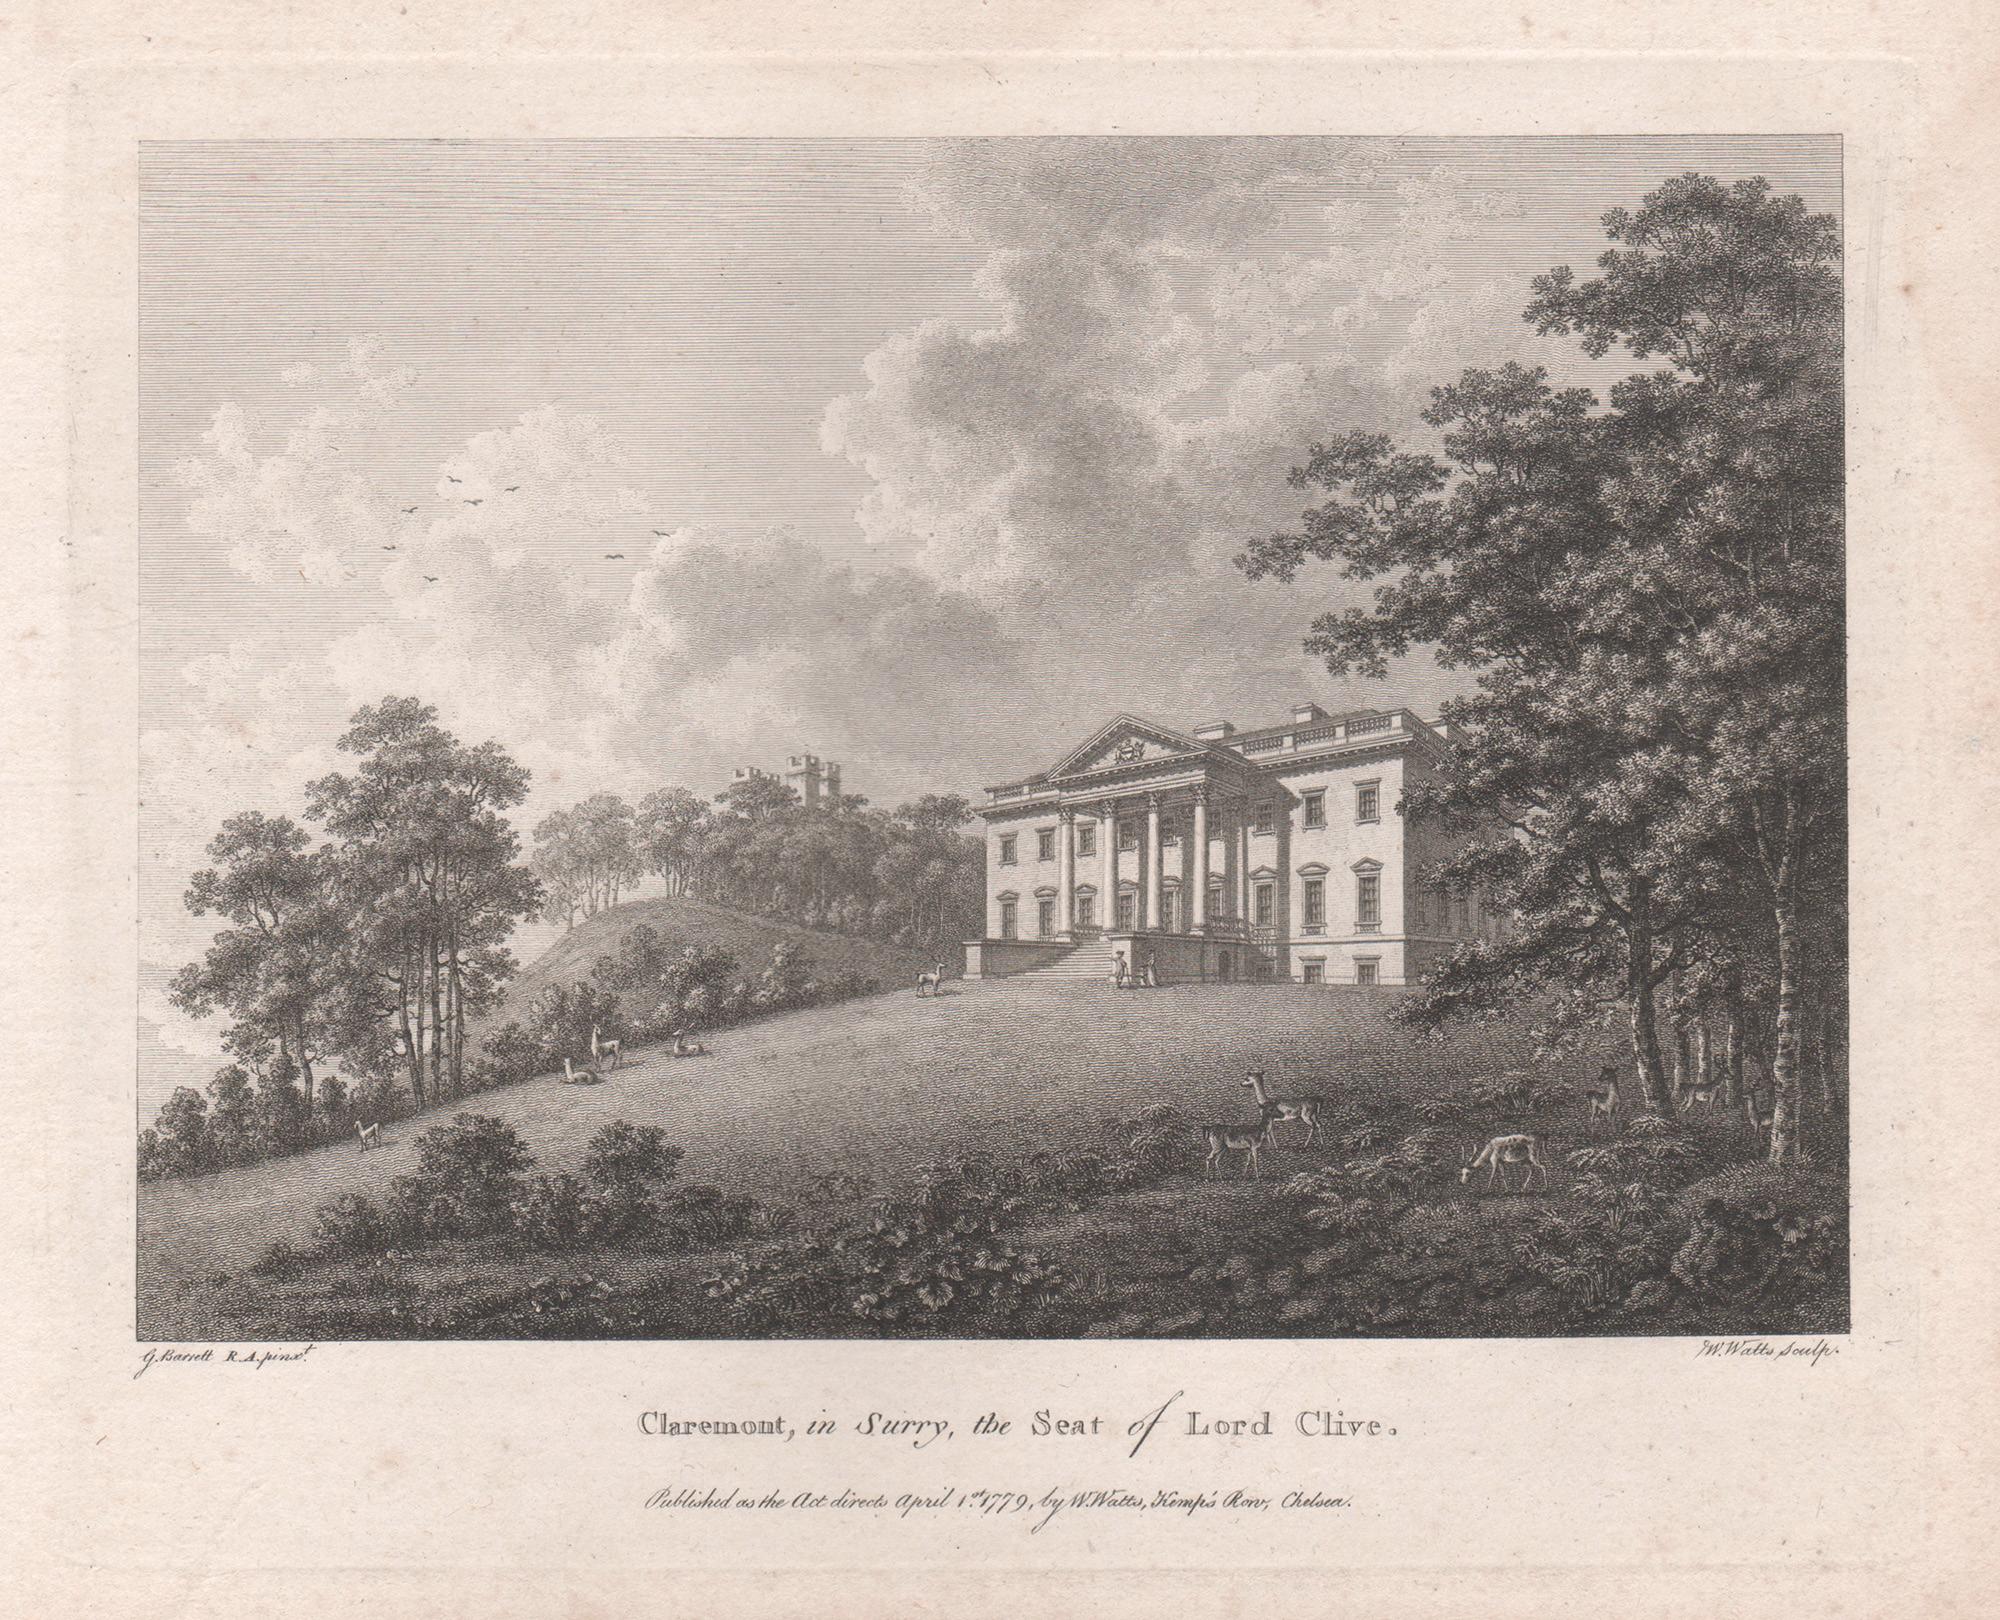 Claremont, in Surrey, 18th century English country house engraving, 1782